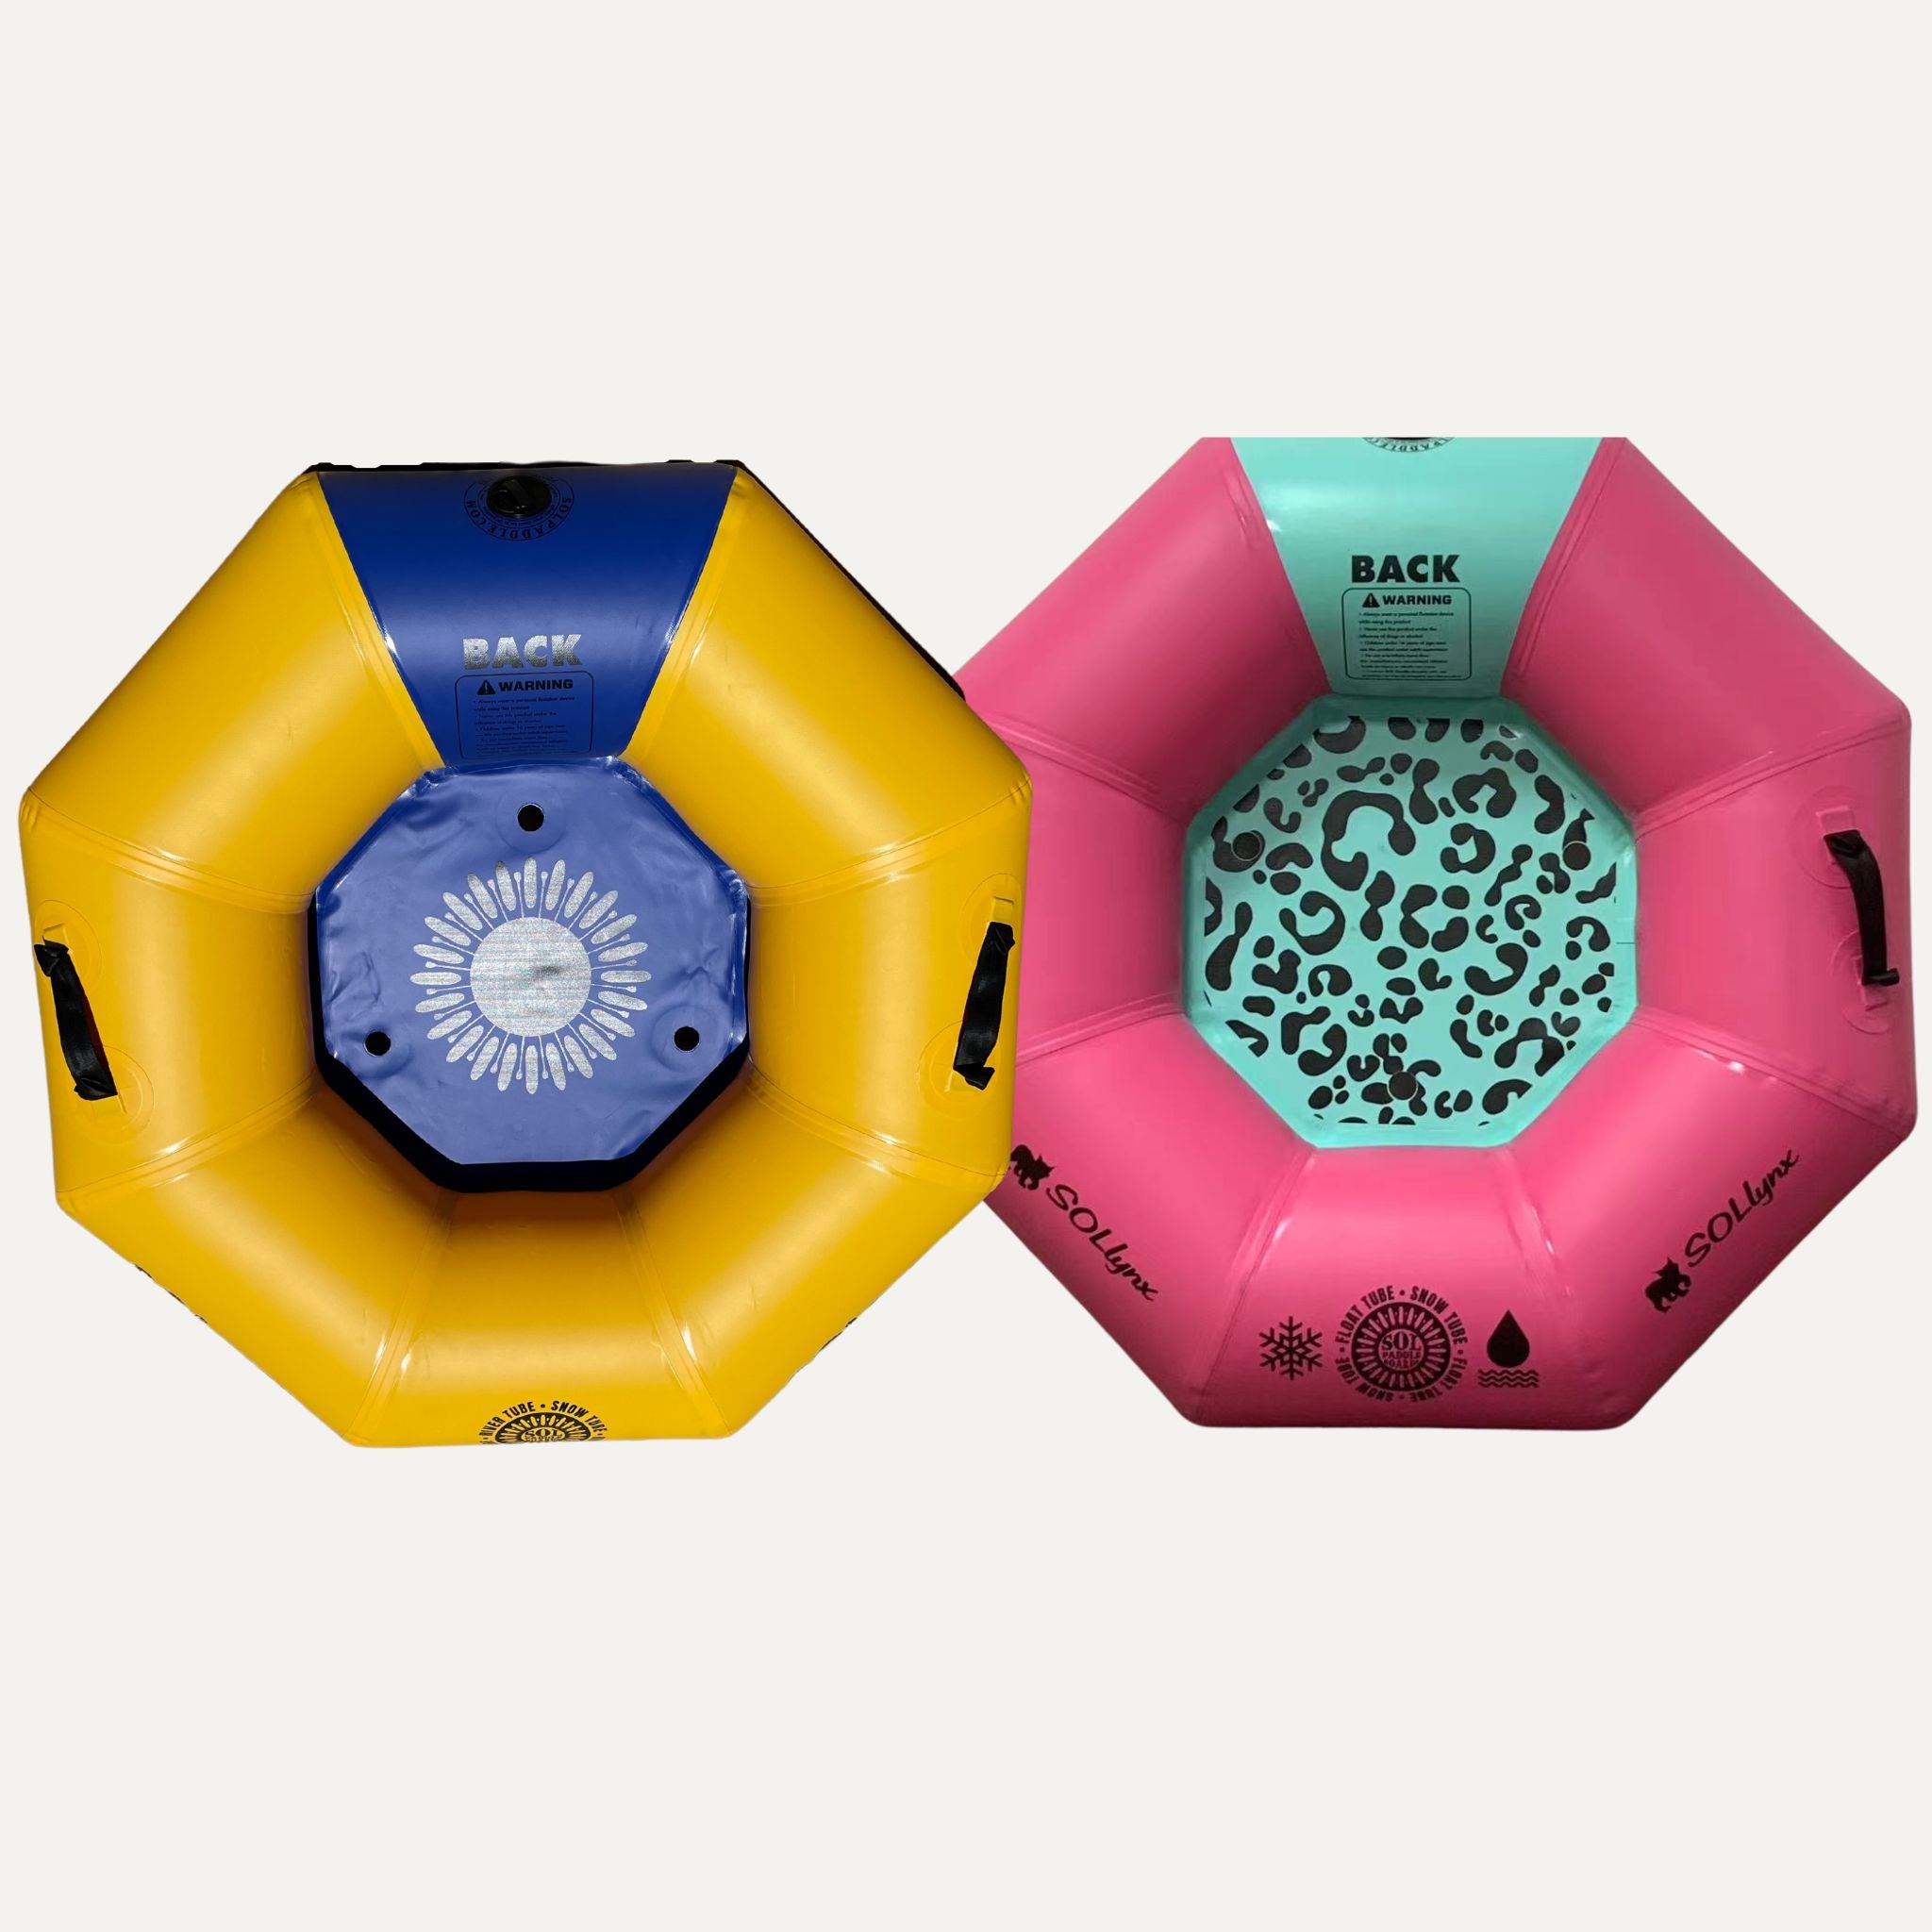 Two SOLtube inflatables side by side, one in yellow and blue, the other in pink and teal, viewed from the top.